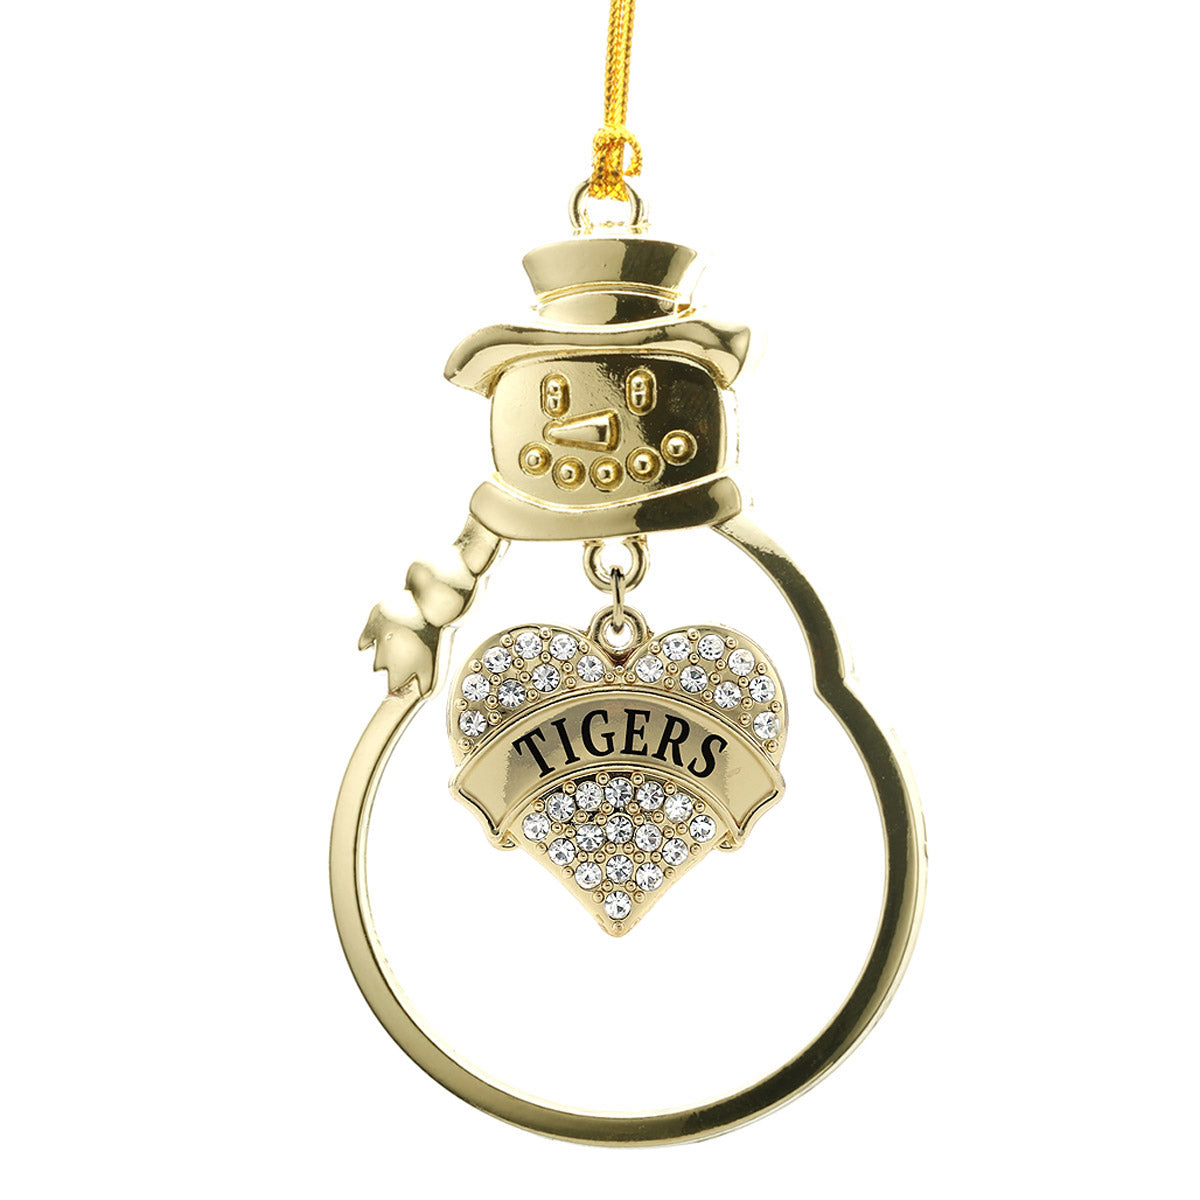 Gold Tigers Pave Heart Charm Snowman Ornament